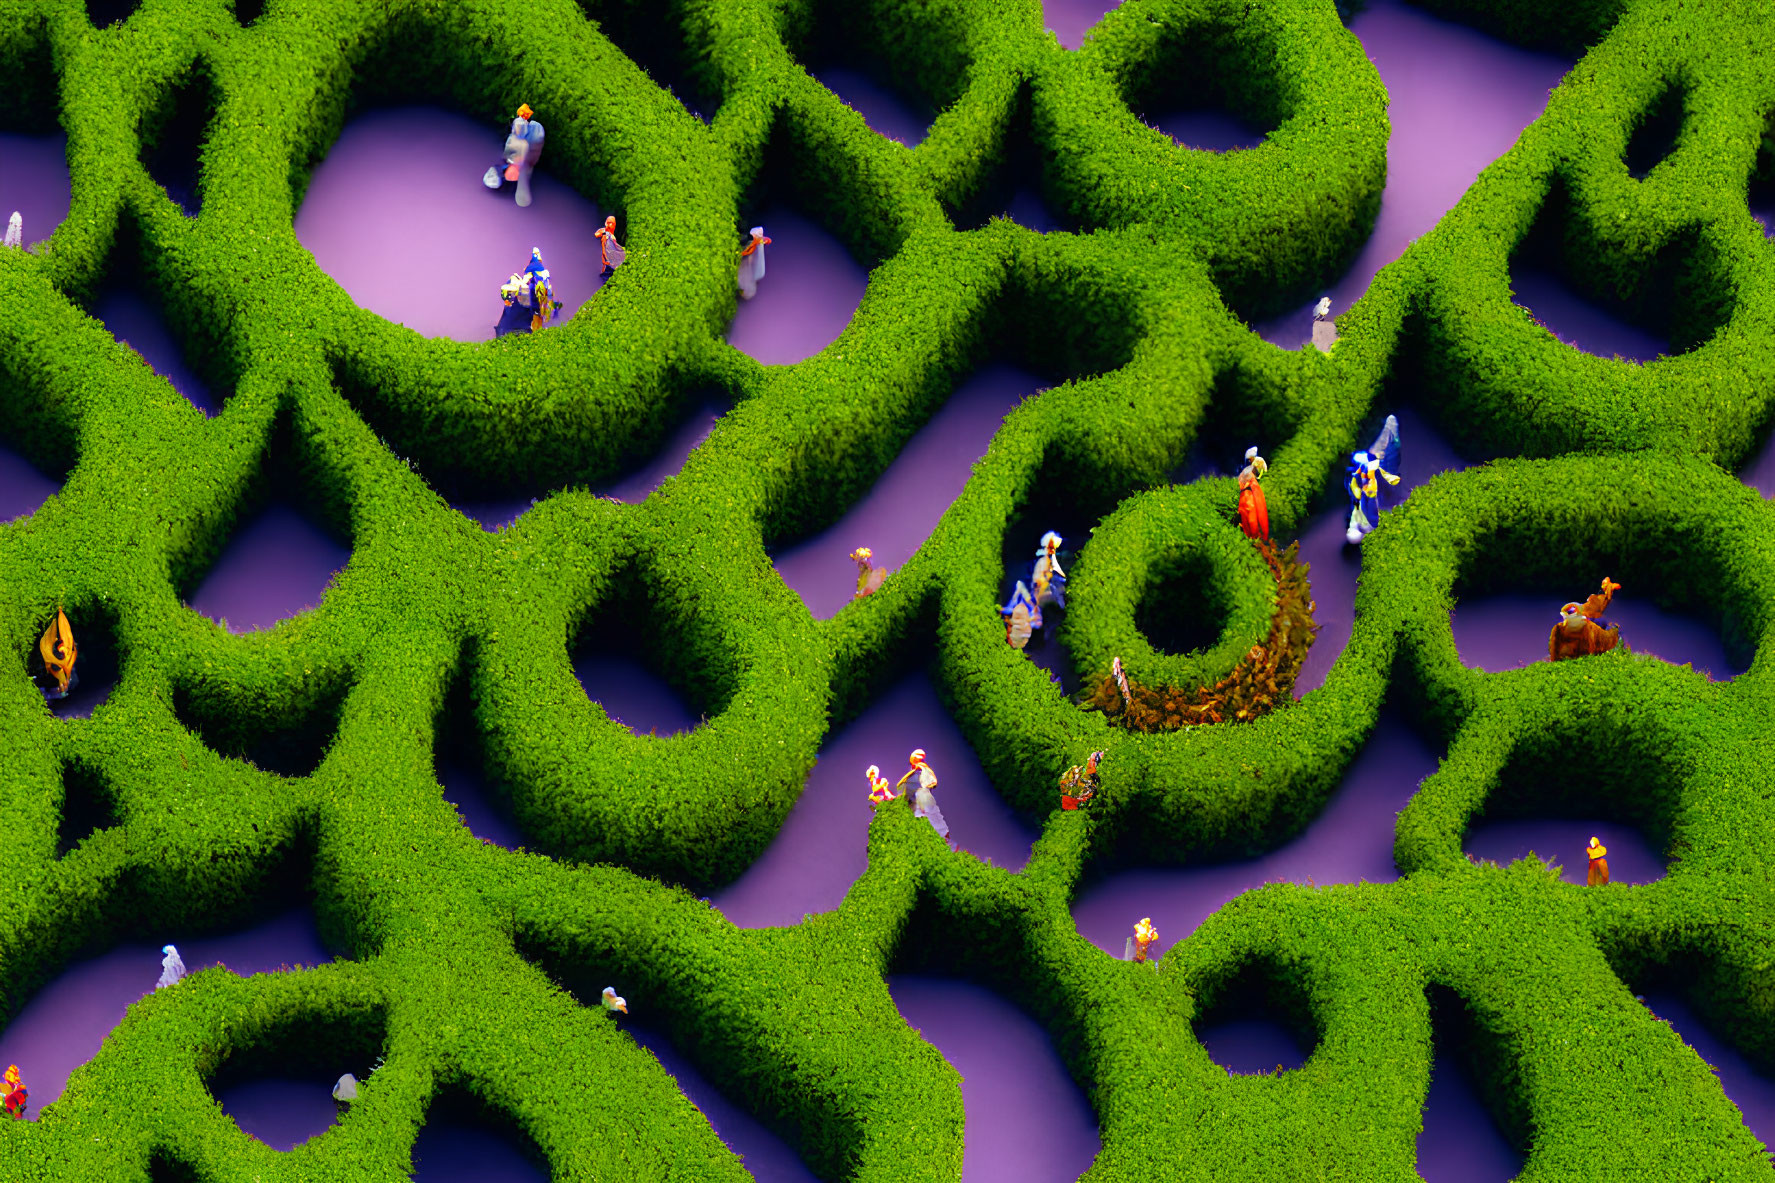 Green hedge maze with scattered people on purple background